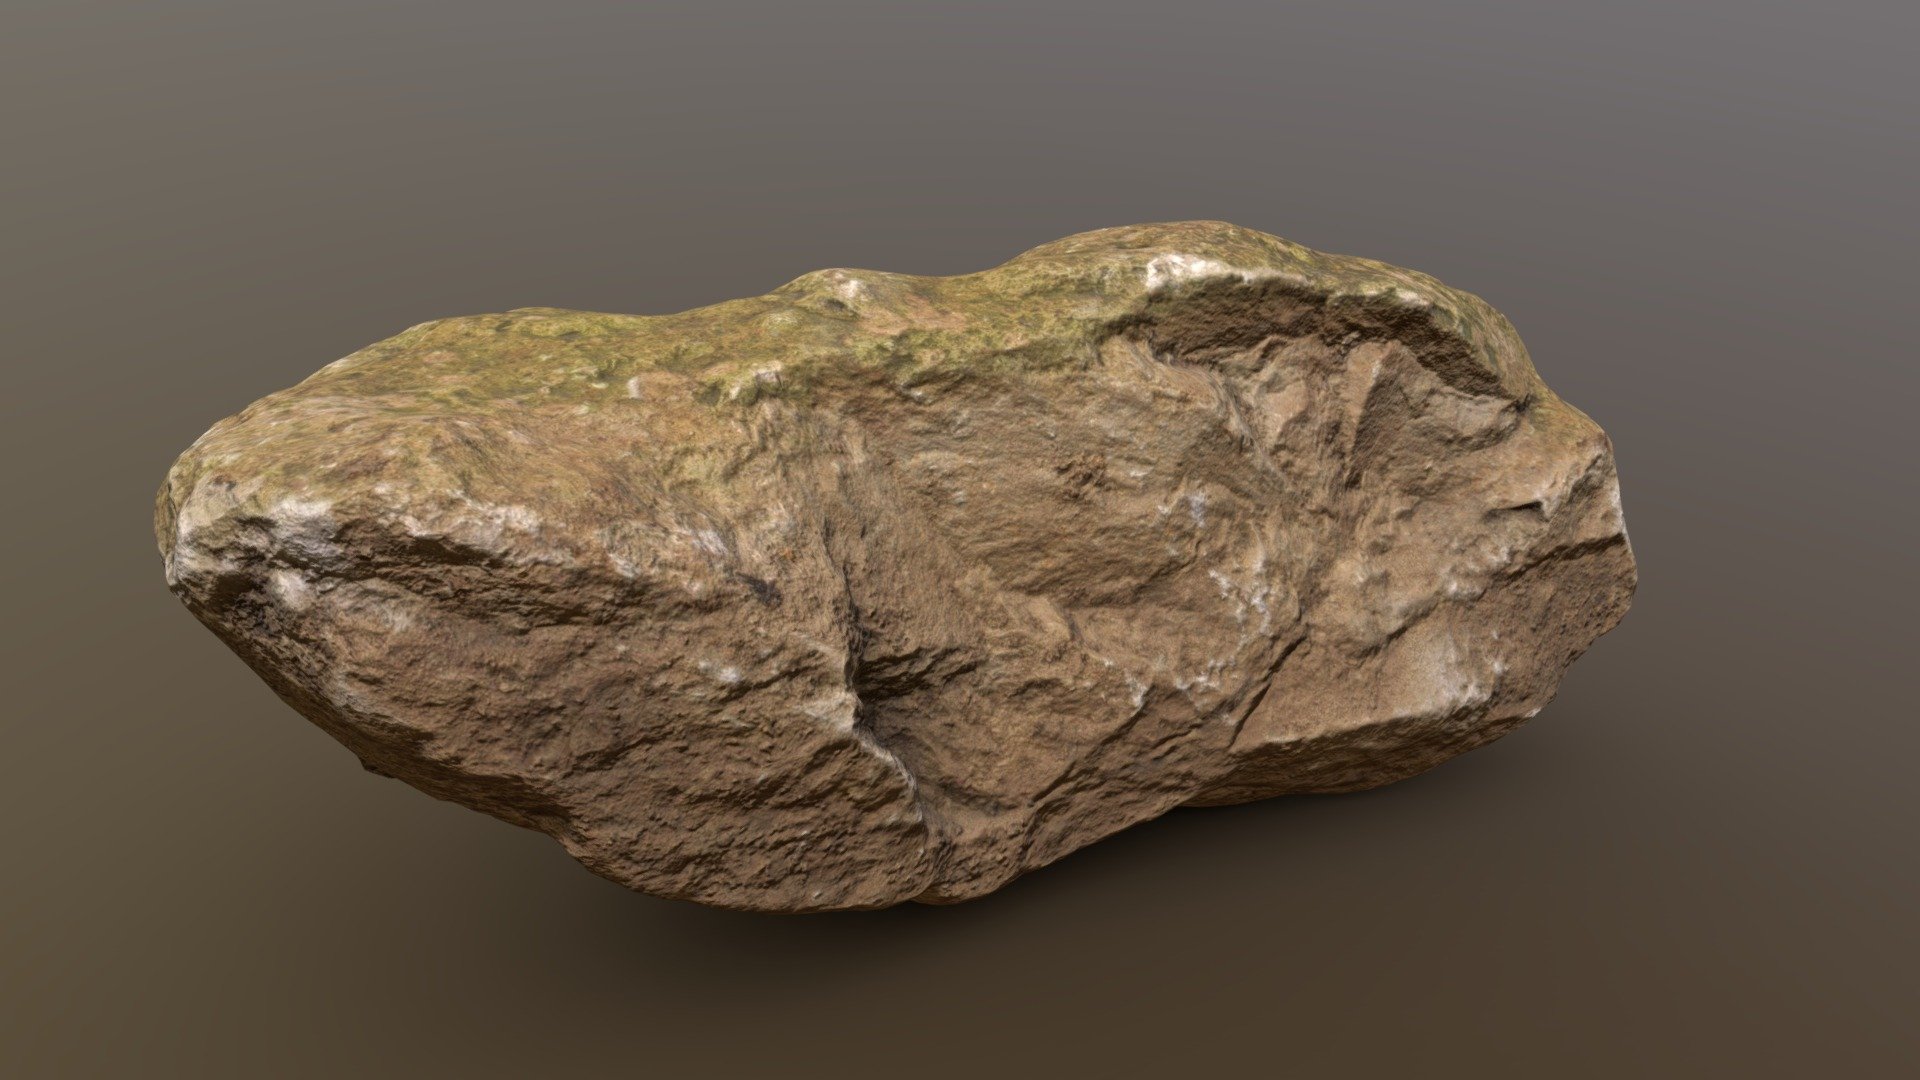 Free Rock Part of my Rock Pack Vol.1

This is included with a purchase of my rock pack vol.1, check out the collection Here to see all the rocks you will receive, purchasing one rock will receive all 7 in a blend file with materials and textures set up.

Includes 4k PBR Color, Normal and Roughness maps.

Most models were brought down from 20-30million poly count.

All models are seamless and watertight 3d model